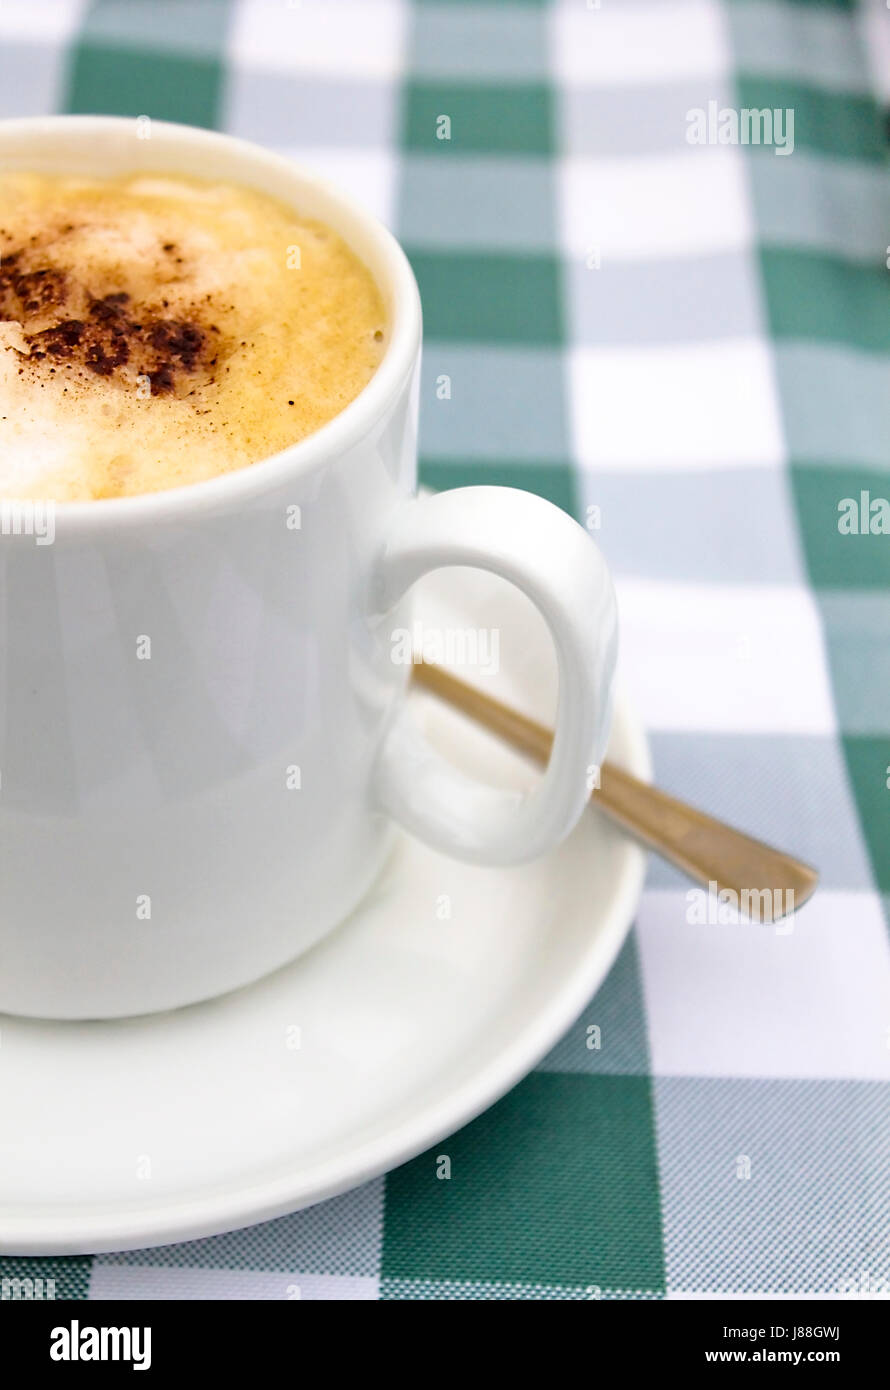 cafe, cup, drink, drinking, bibs, green, cappuccino, cappuchino, coffee, Stock Photo